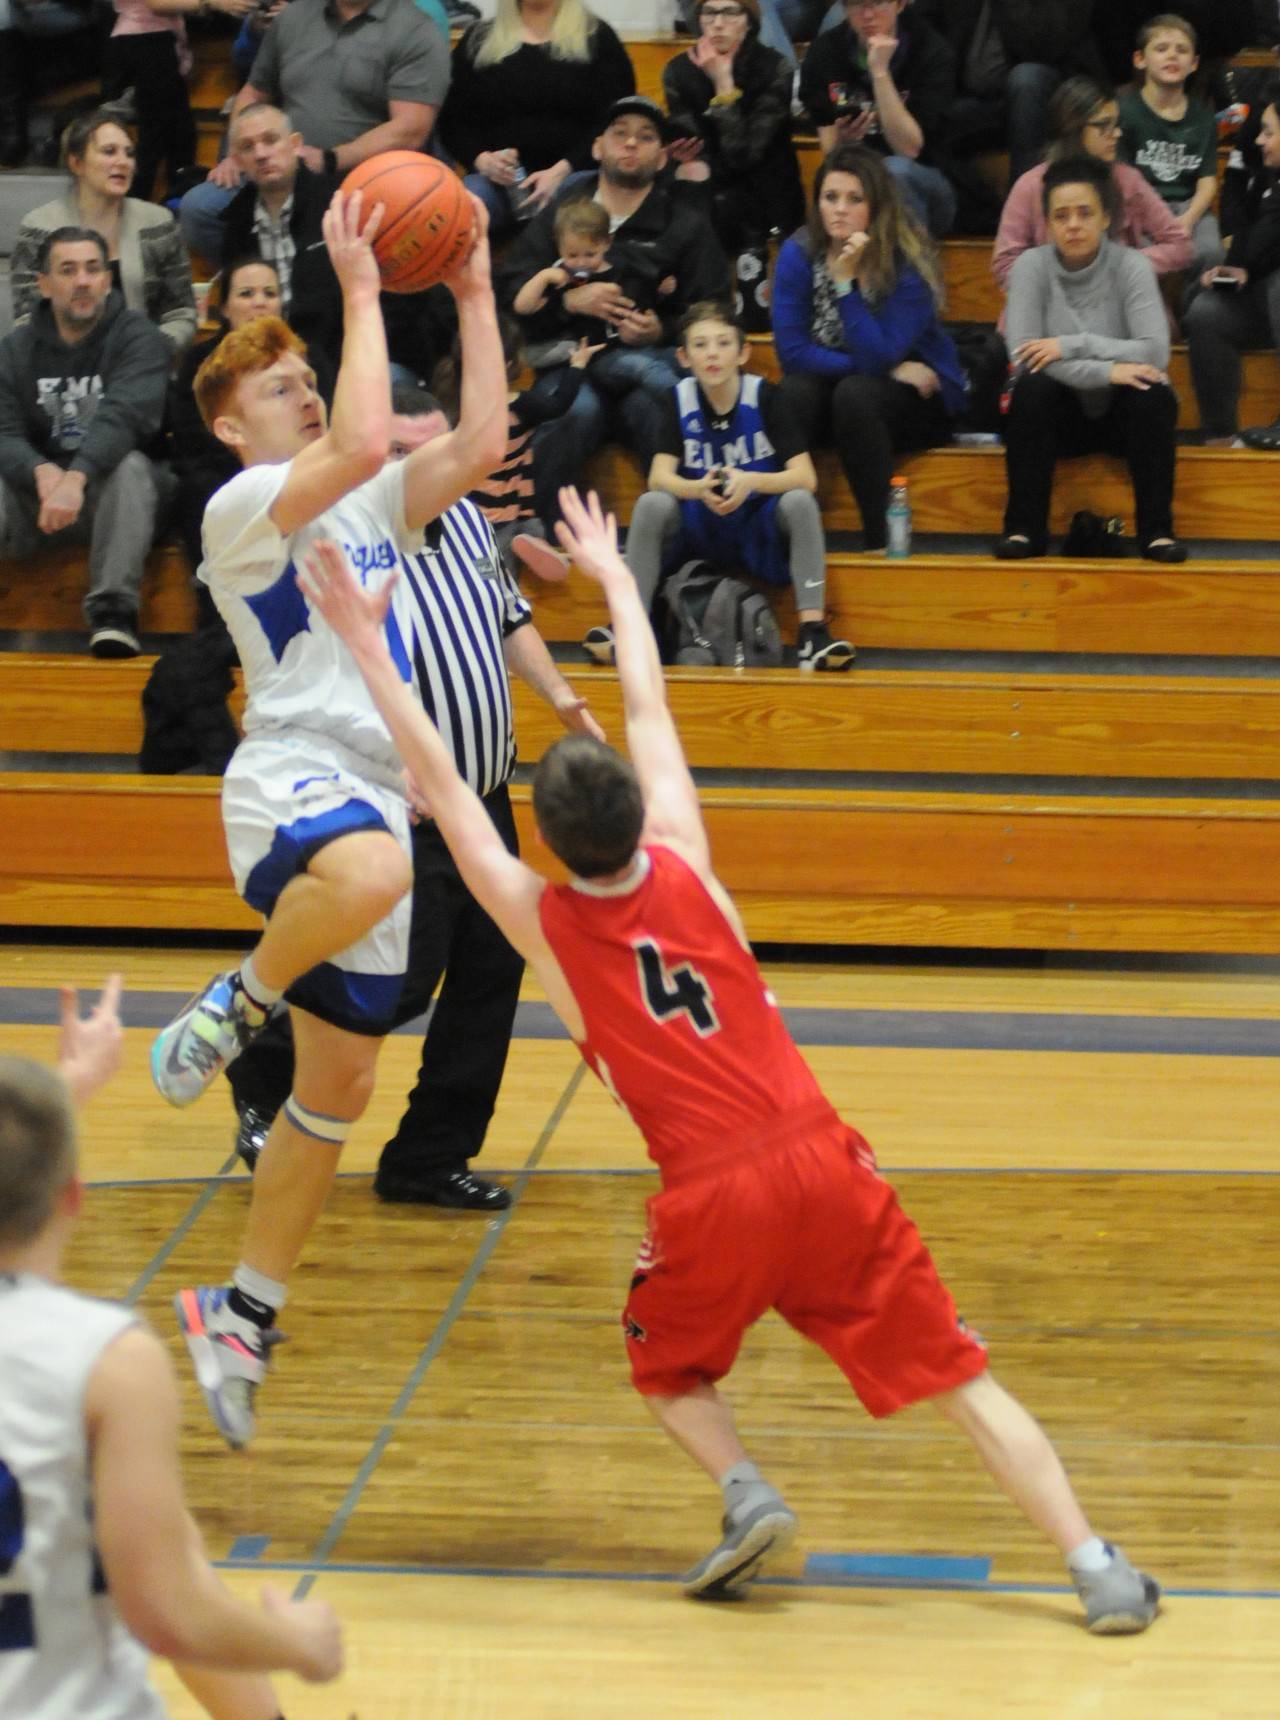 Elma’s Nick Church, left, puts up a shot against Tenino’s Zack Russell (4) during the second half of the Eagles 65-48 victory on Thursday in Elma. (Ryan Sparks | Grays Harbor News Group)